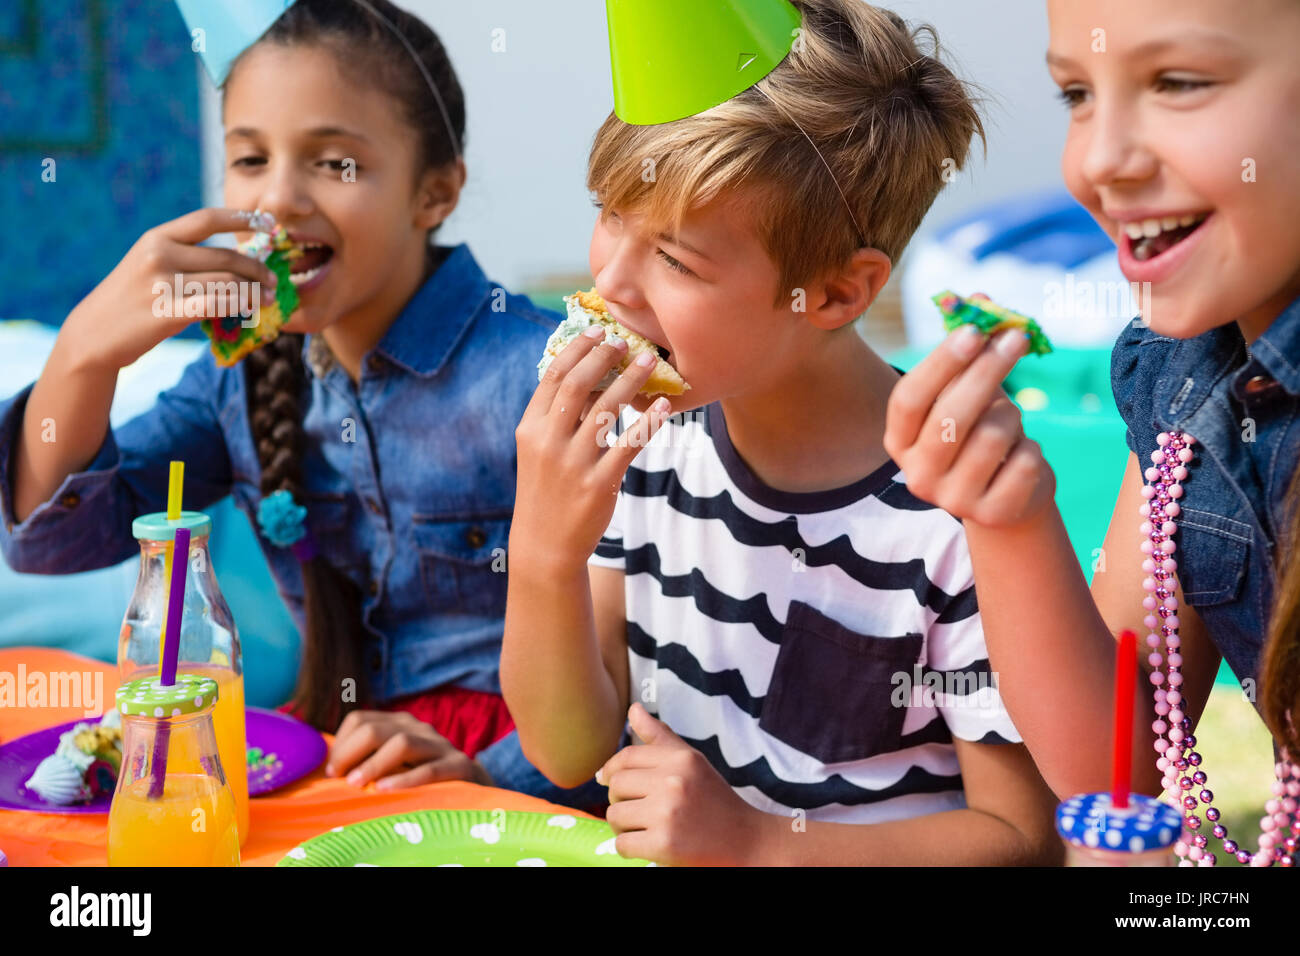 Kids having cake while sitting at table during birthday party Stock Photo